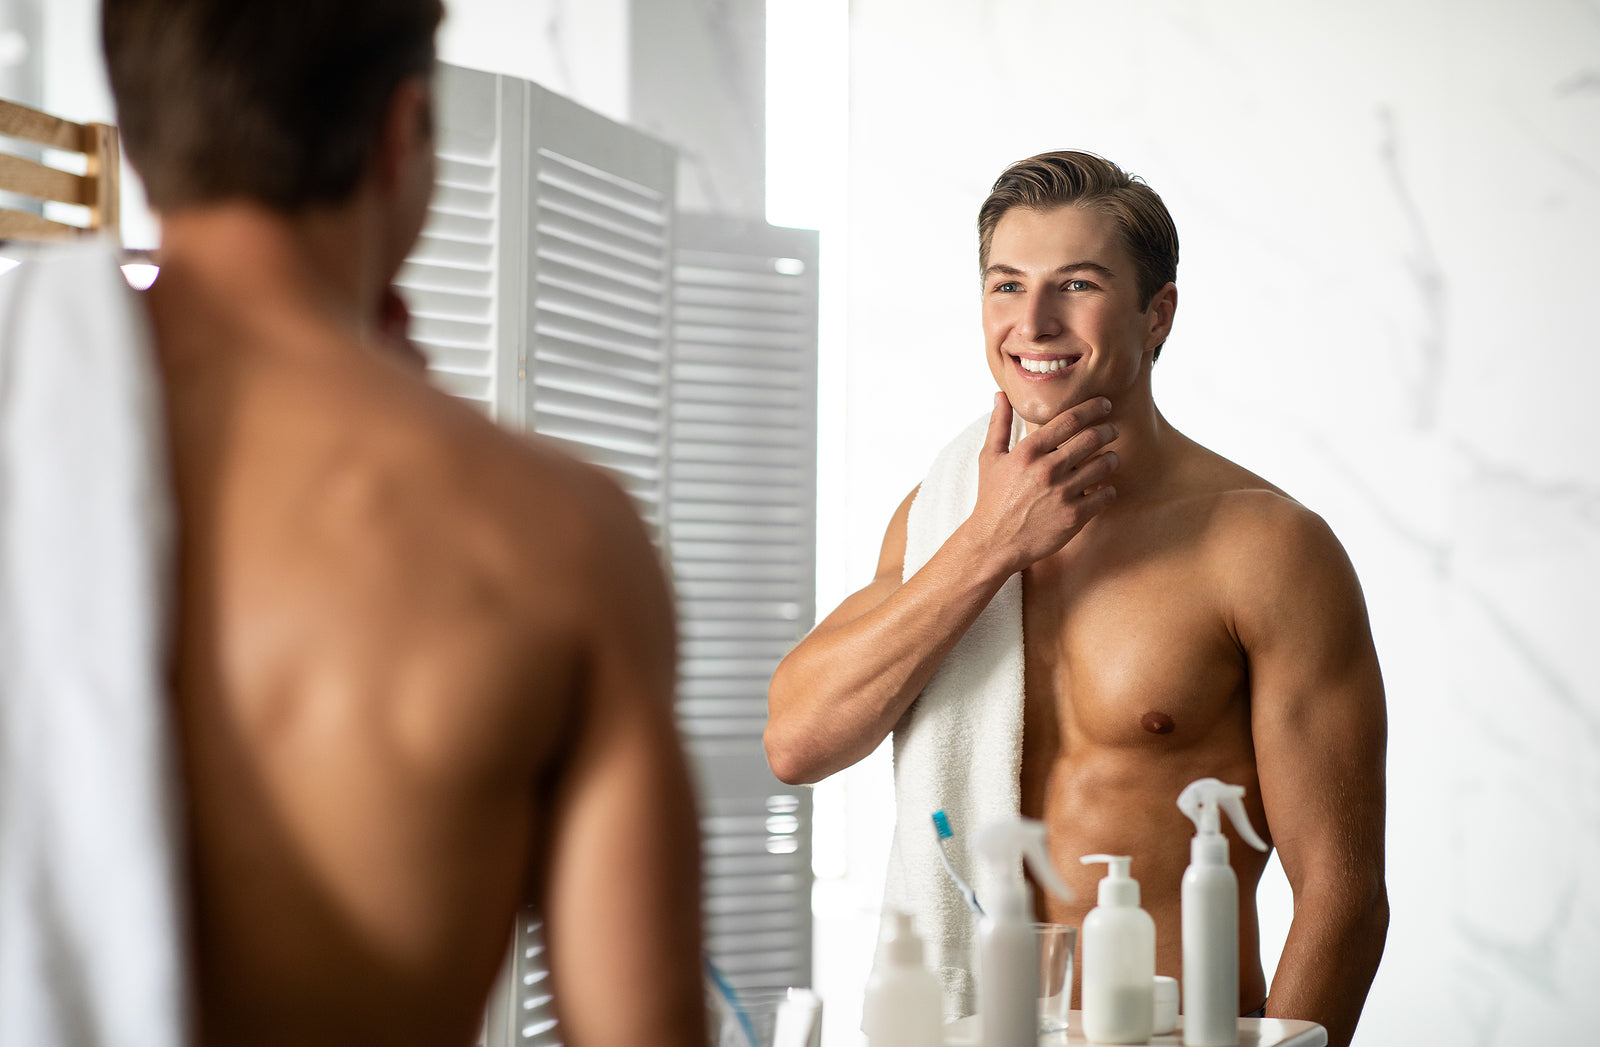 Skin care products for men from Cosmedica Skincare